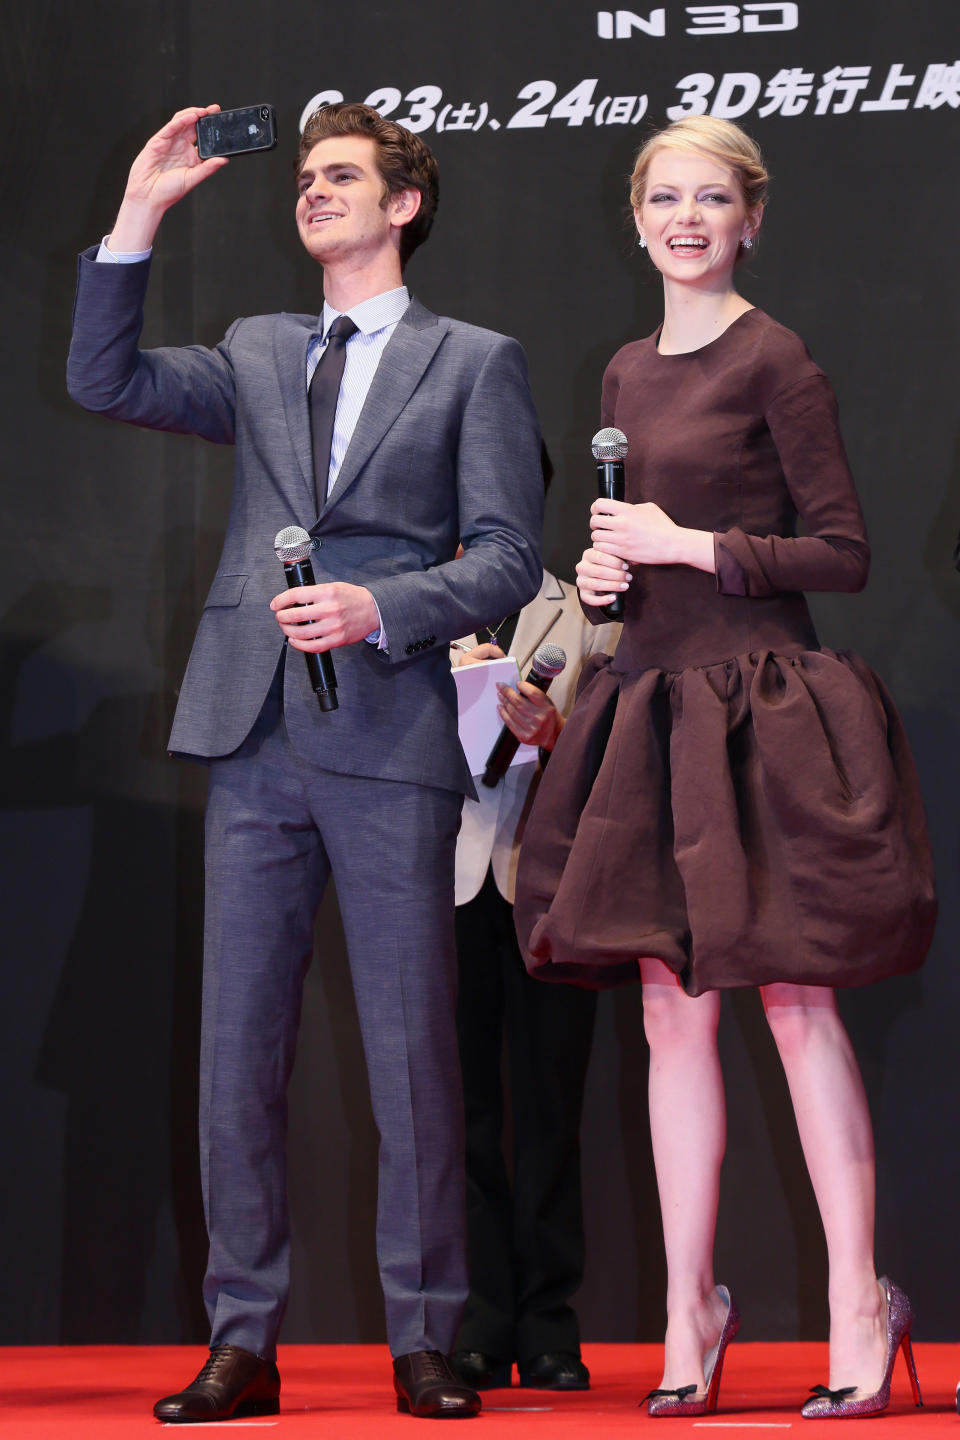 Andrew Garfield and Emma Stone attend the Tokyo premiere of "The Amazing Spider-Man" on June 13, 2012.